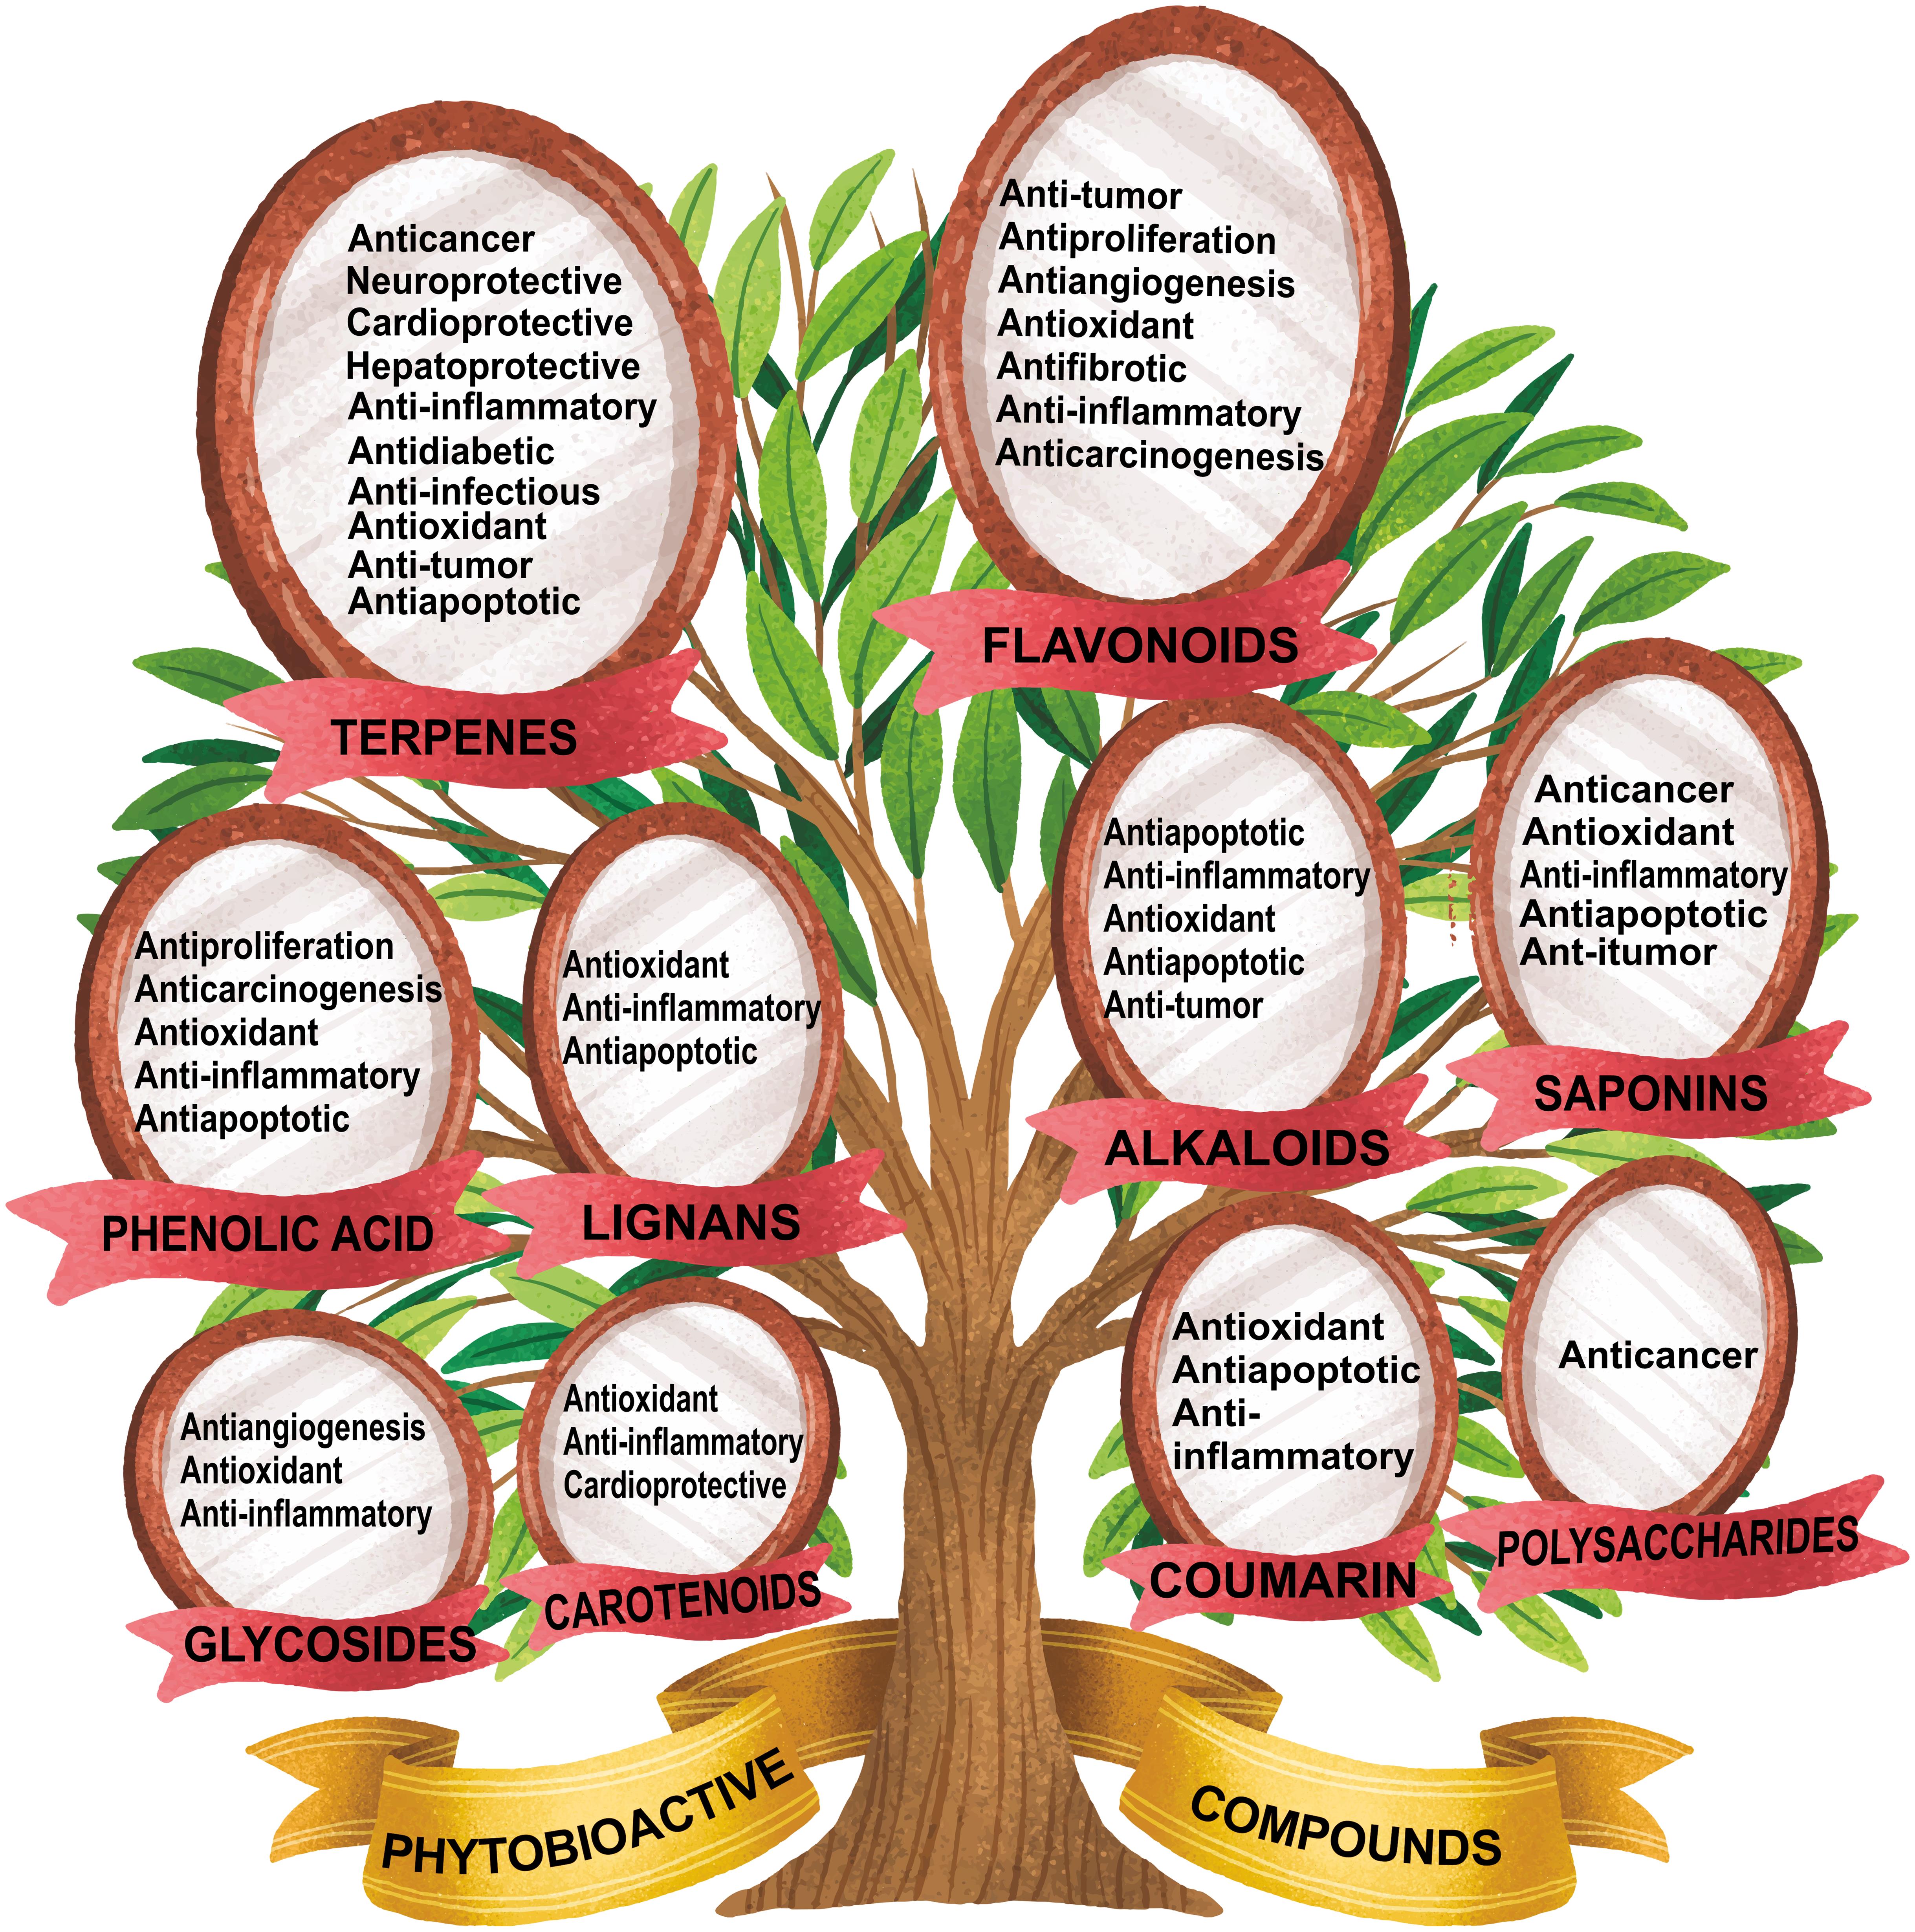 Overview of the therapeutic potential of bioactive compounds.